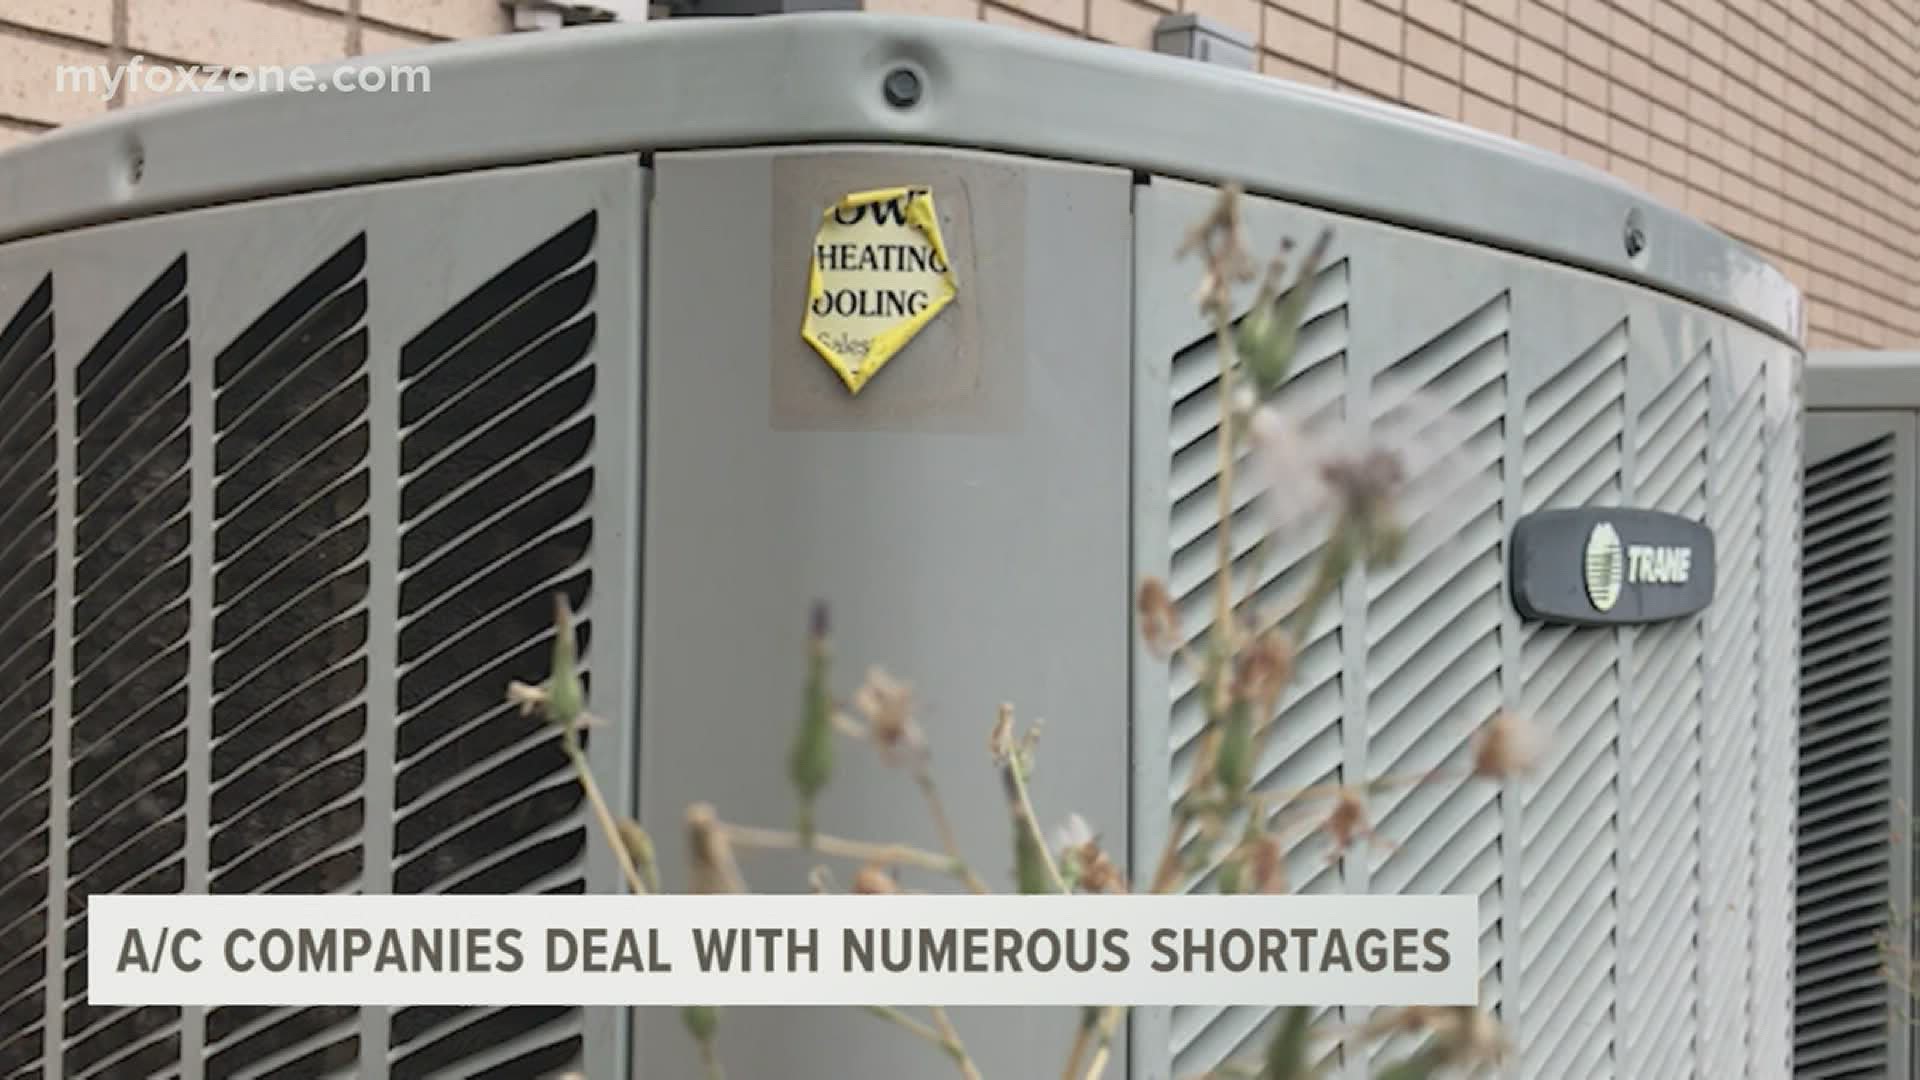 Shortages such as finding employees and supplies have plagued the air conditioning business, thanks to the COVID-19 pandemic, as well as the rising heat.